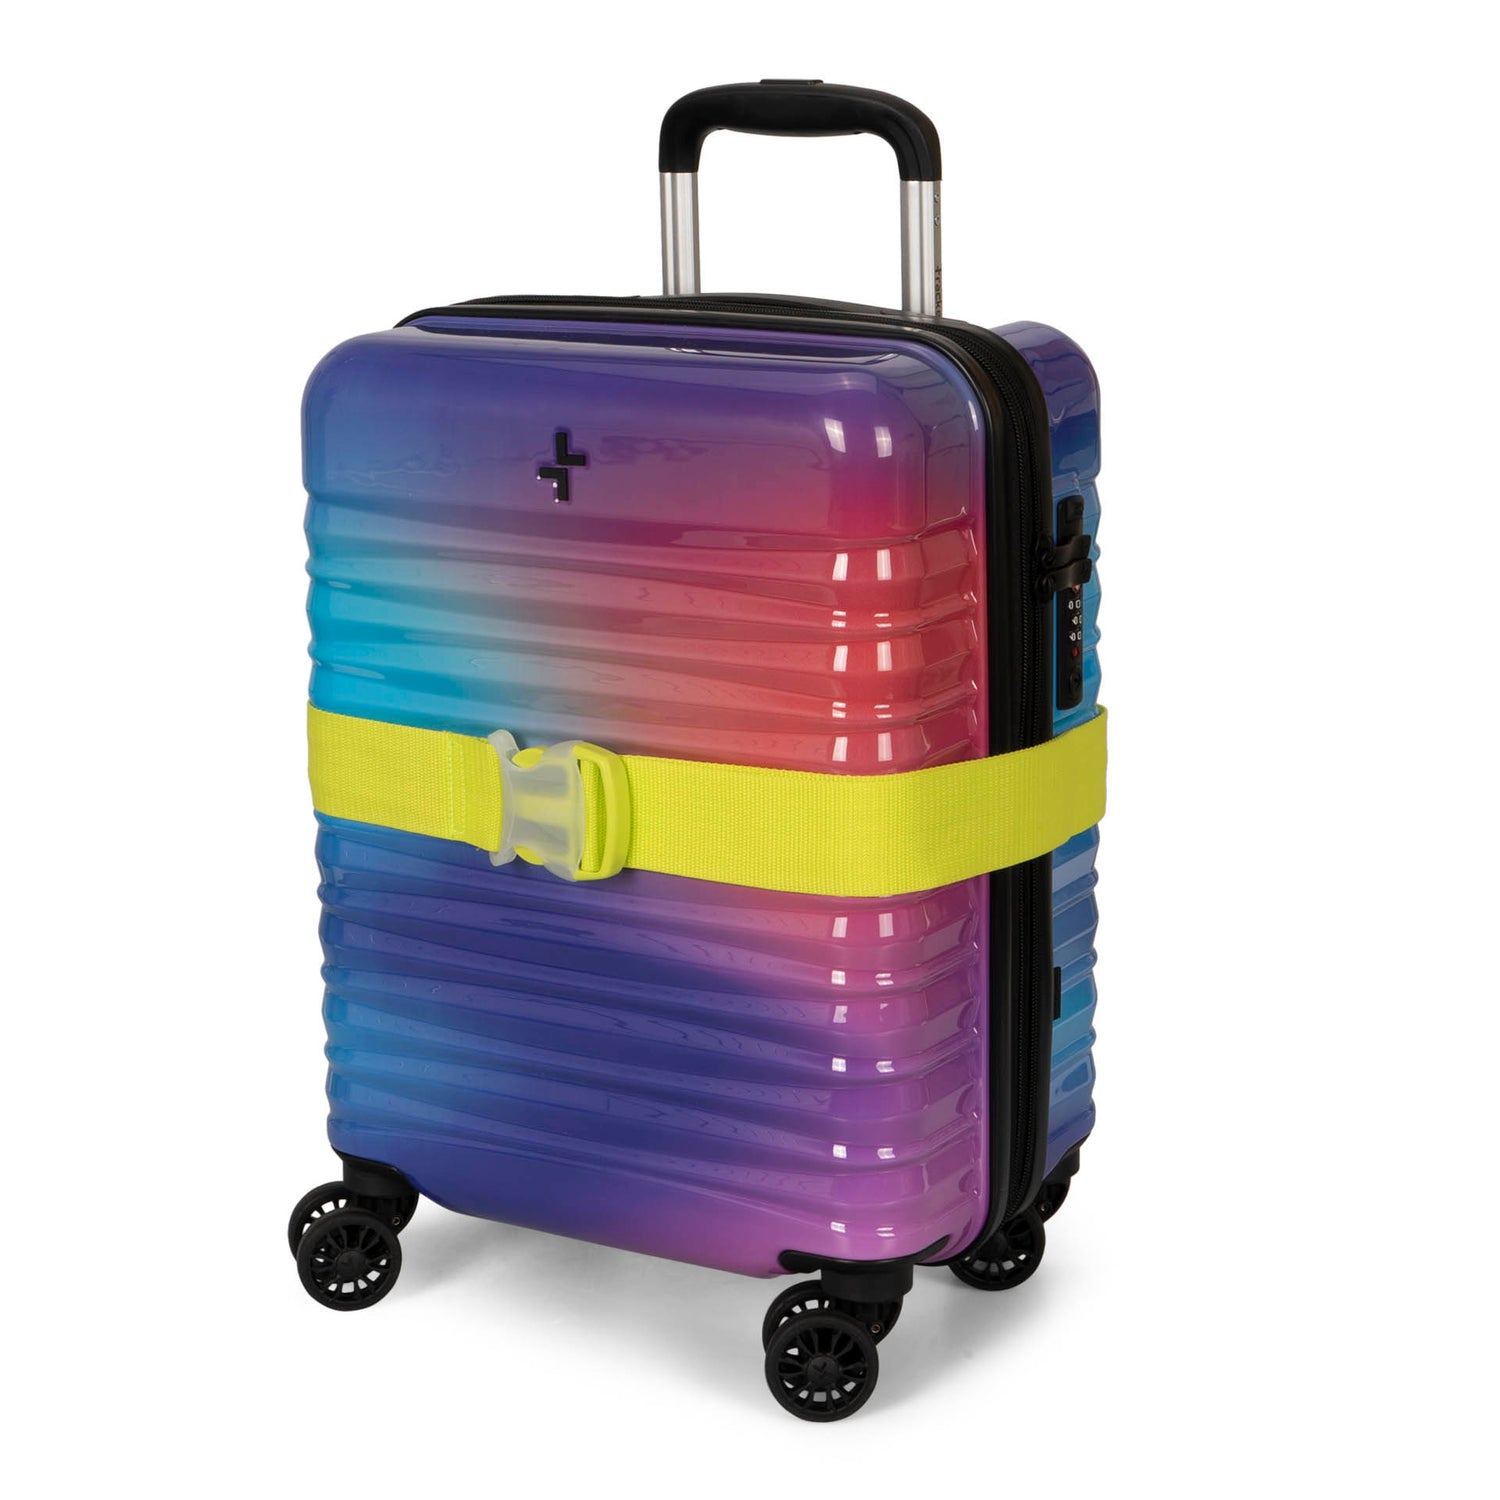 Angle view of a neon luggage strap designed by Tracker that's strapped around a multicoloured luggage that shows it's telescopic handle and spinner wheels.